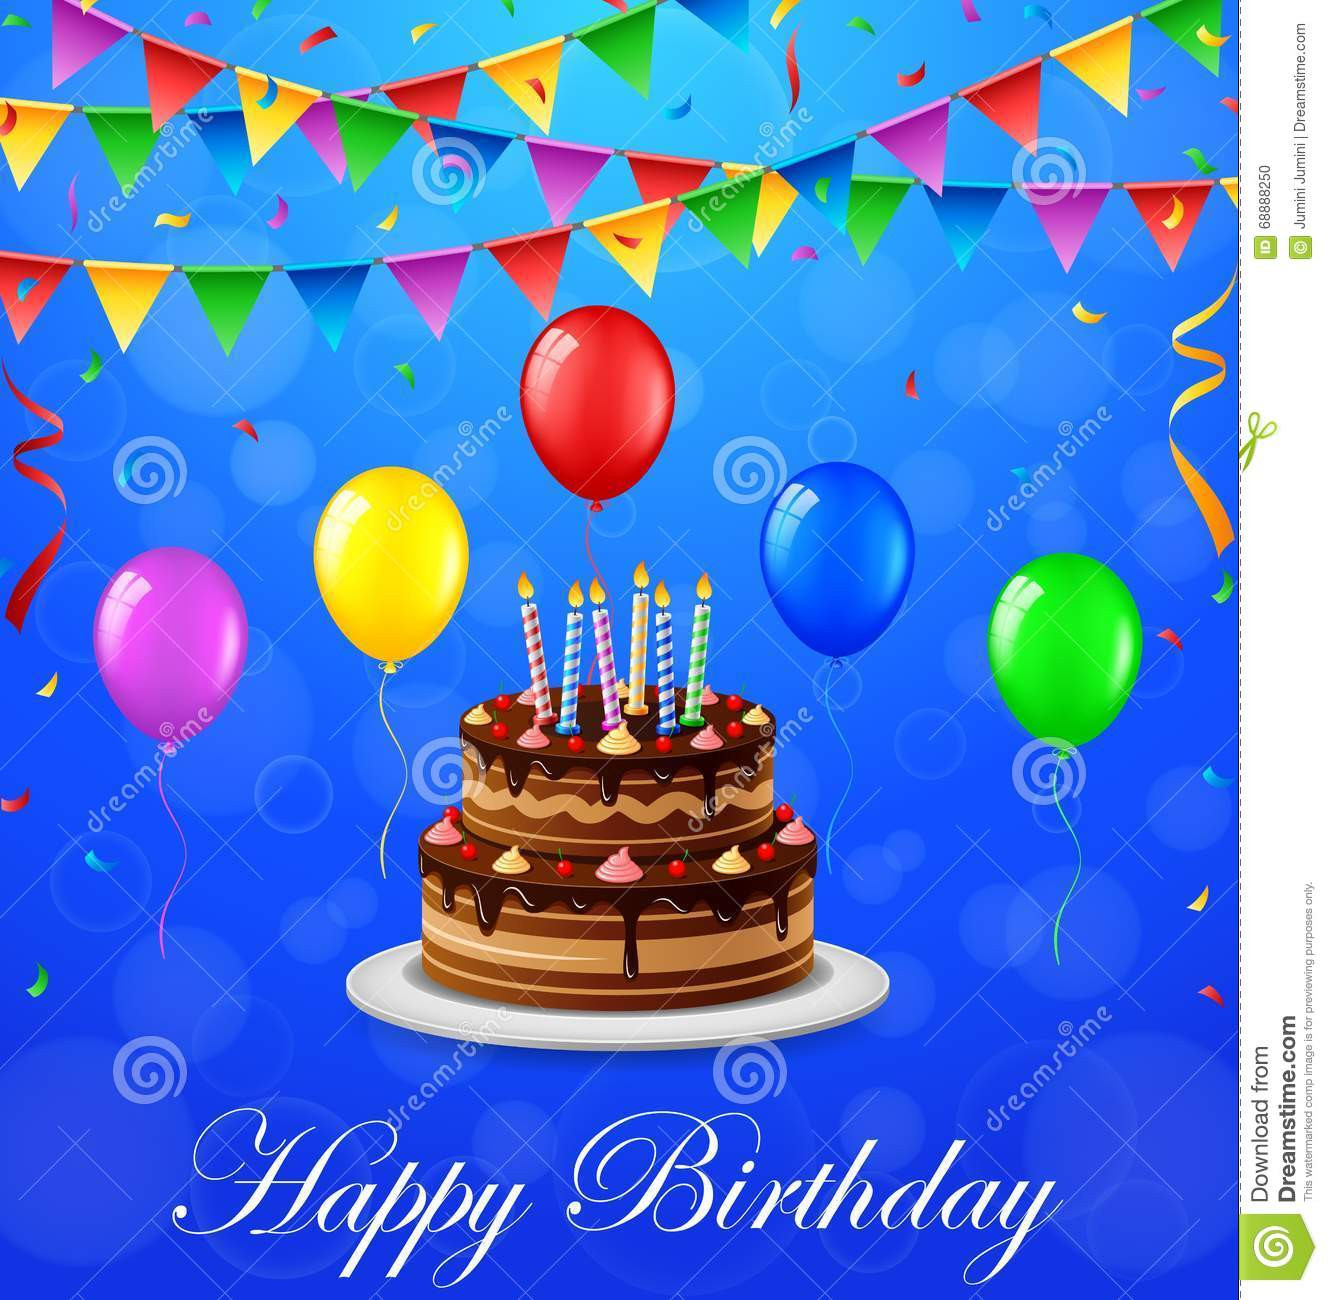 Happy Birthday Cake And Balloons
 Happy Birthday Background With Cake And Balloons Stock